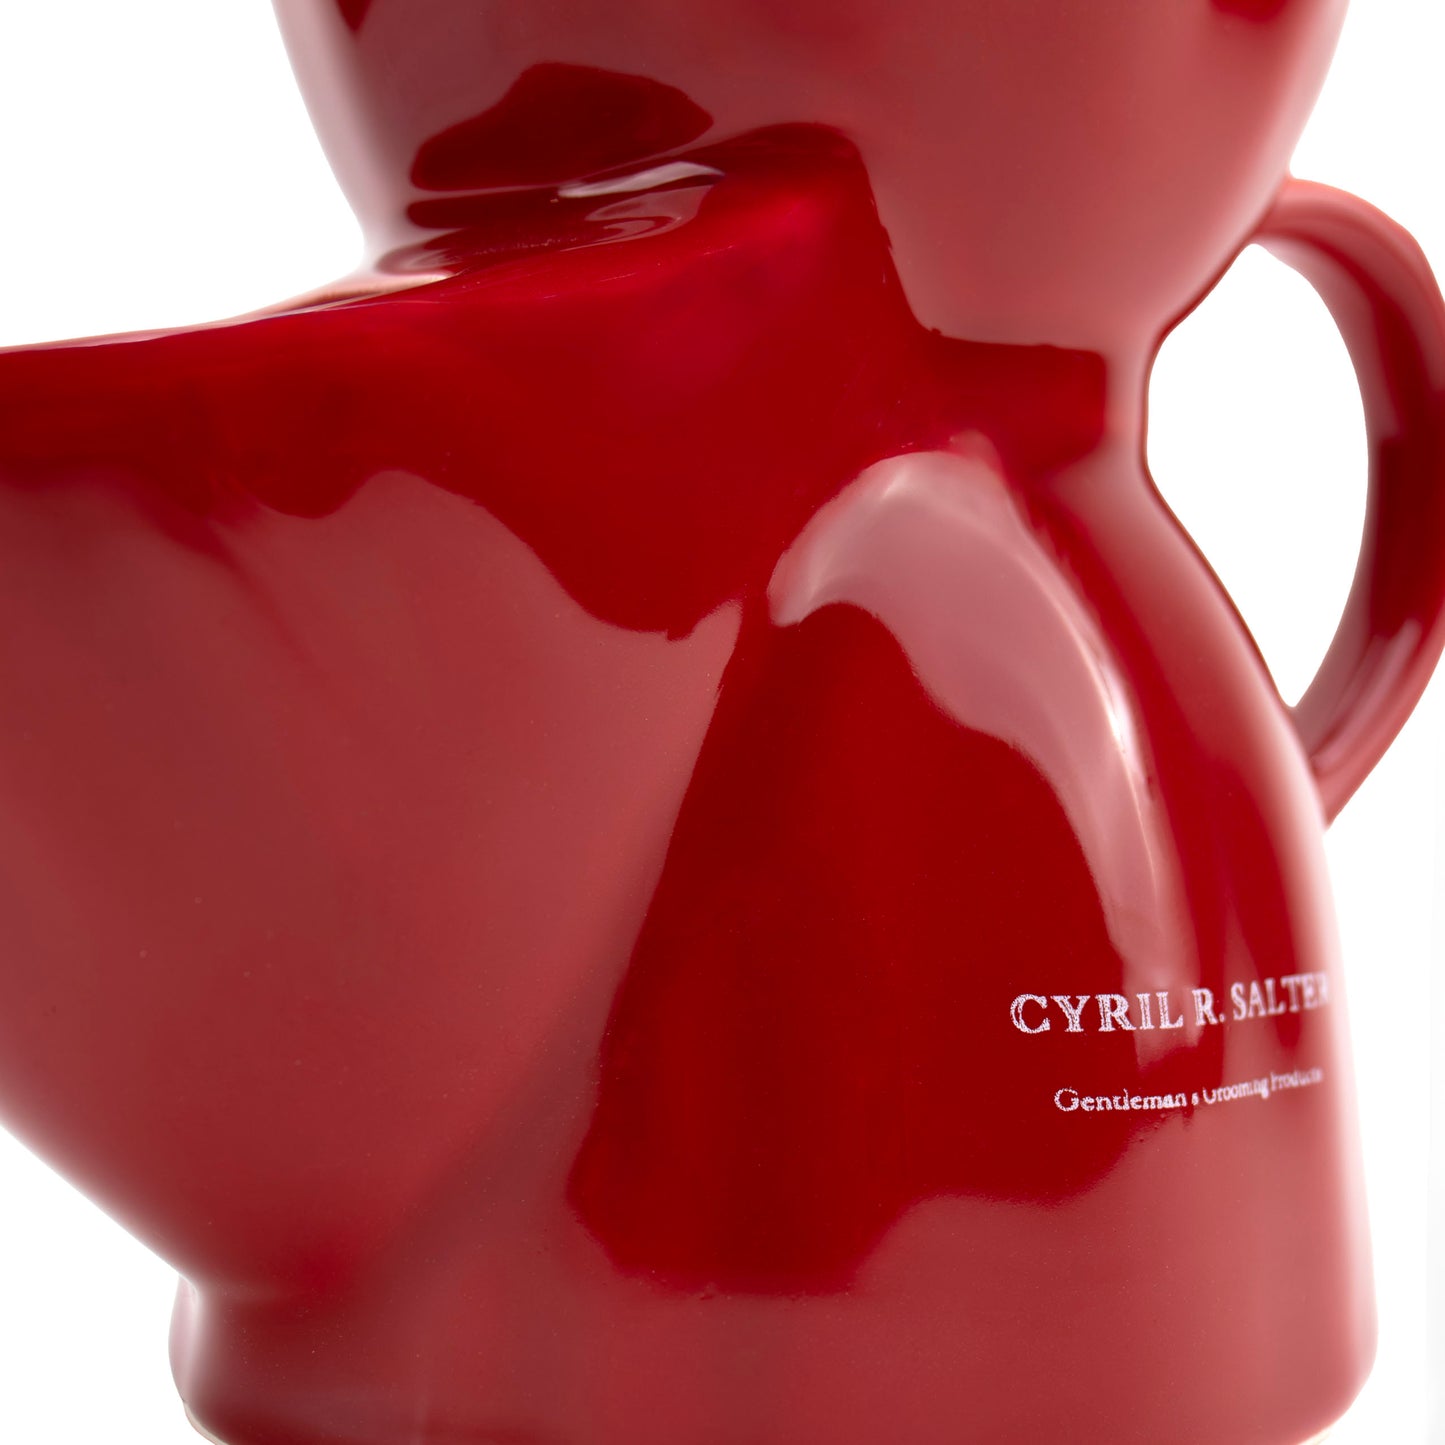 Cyril R. Salter Red Traditional Shaving Scuttle